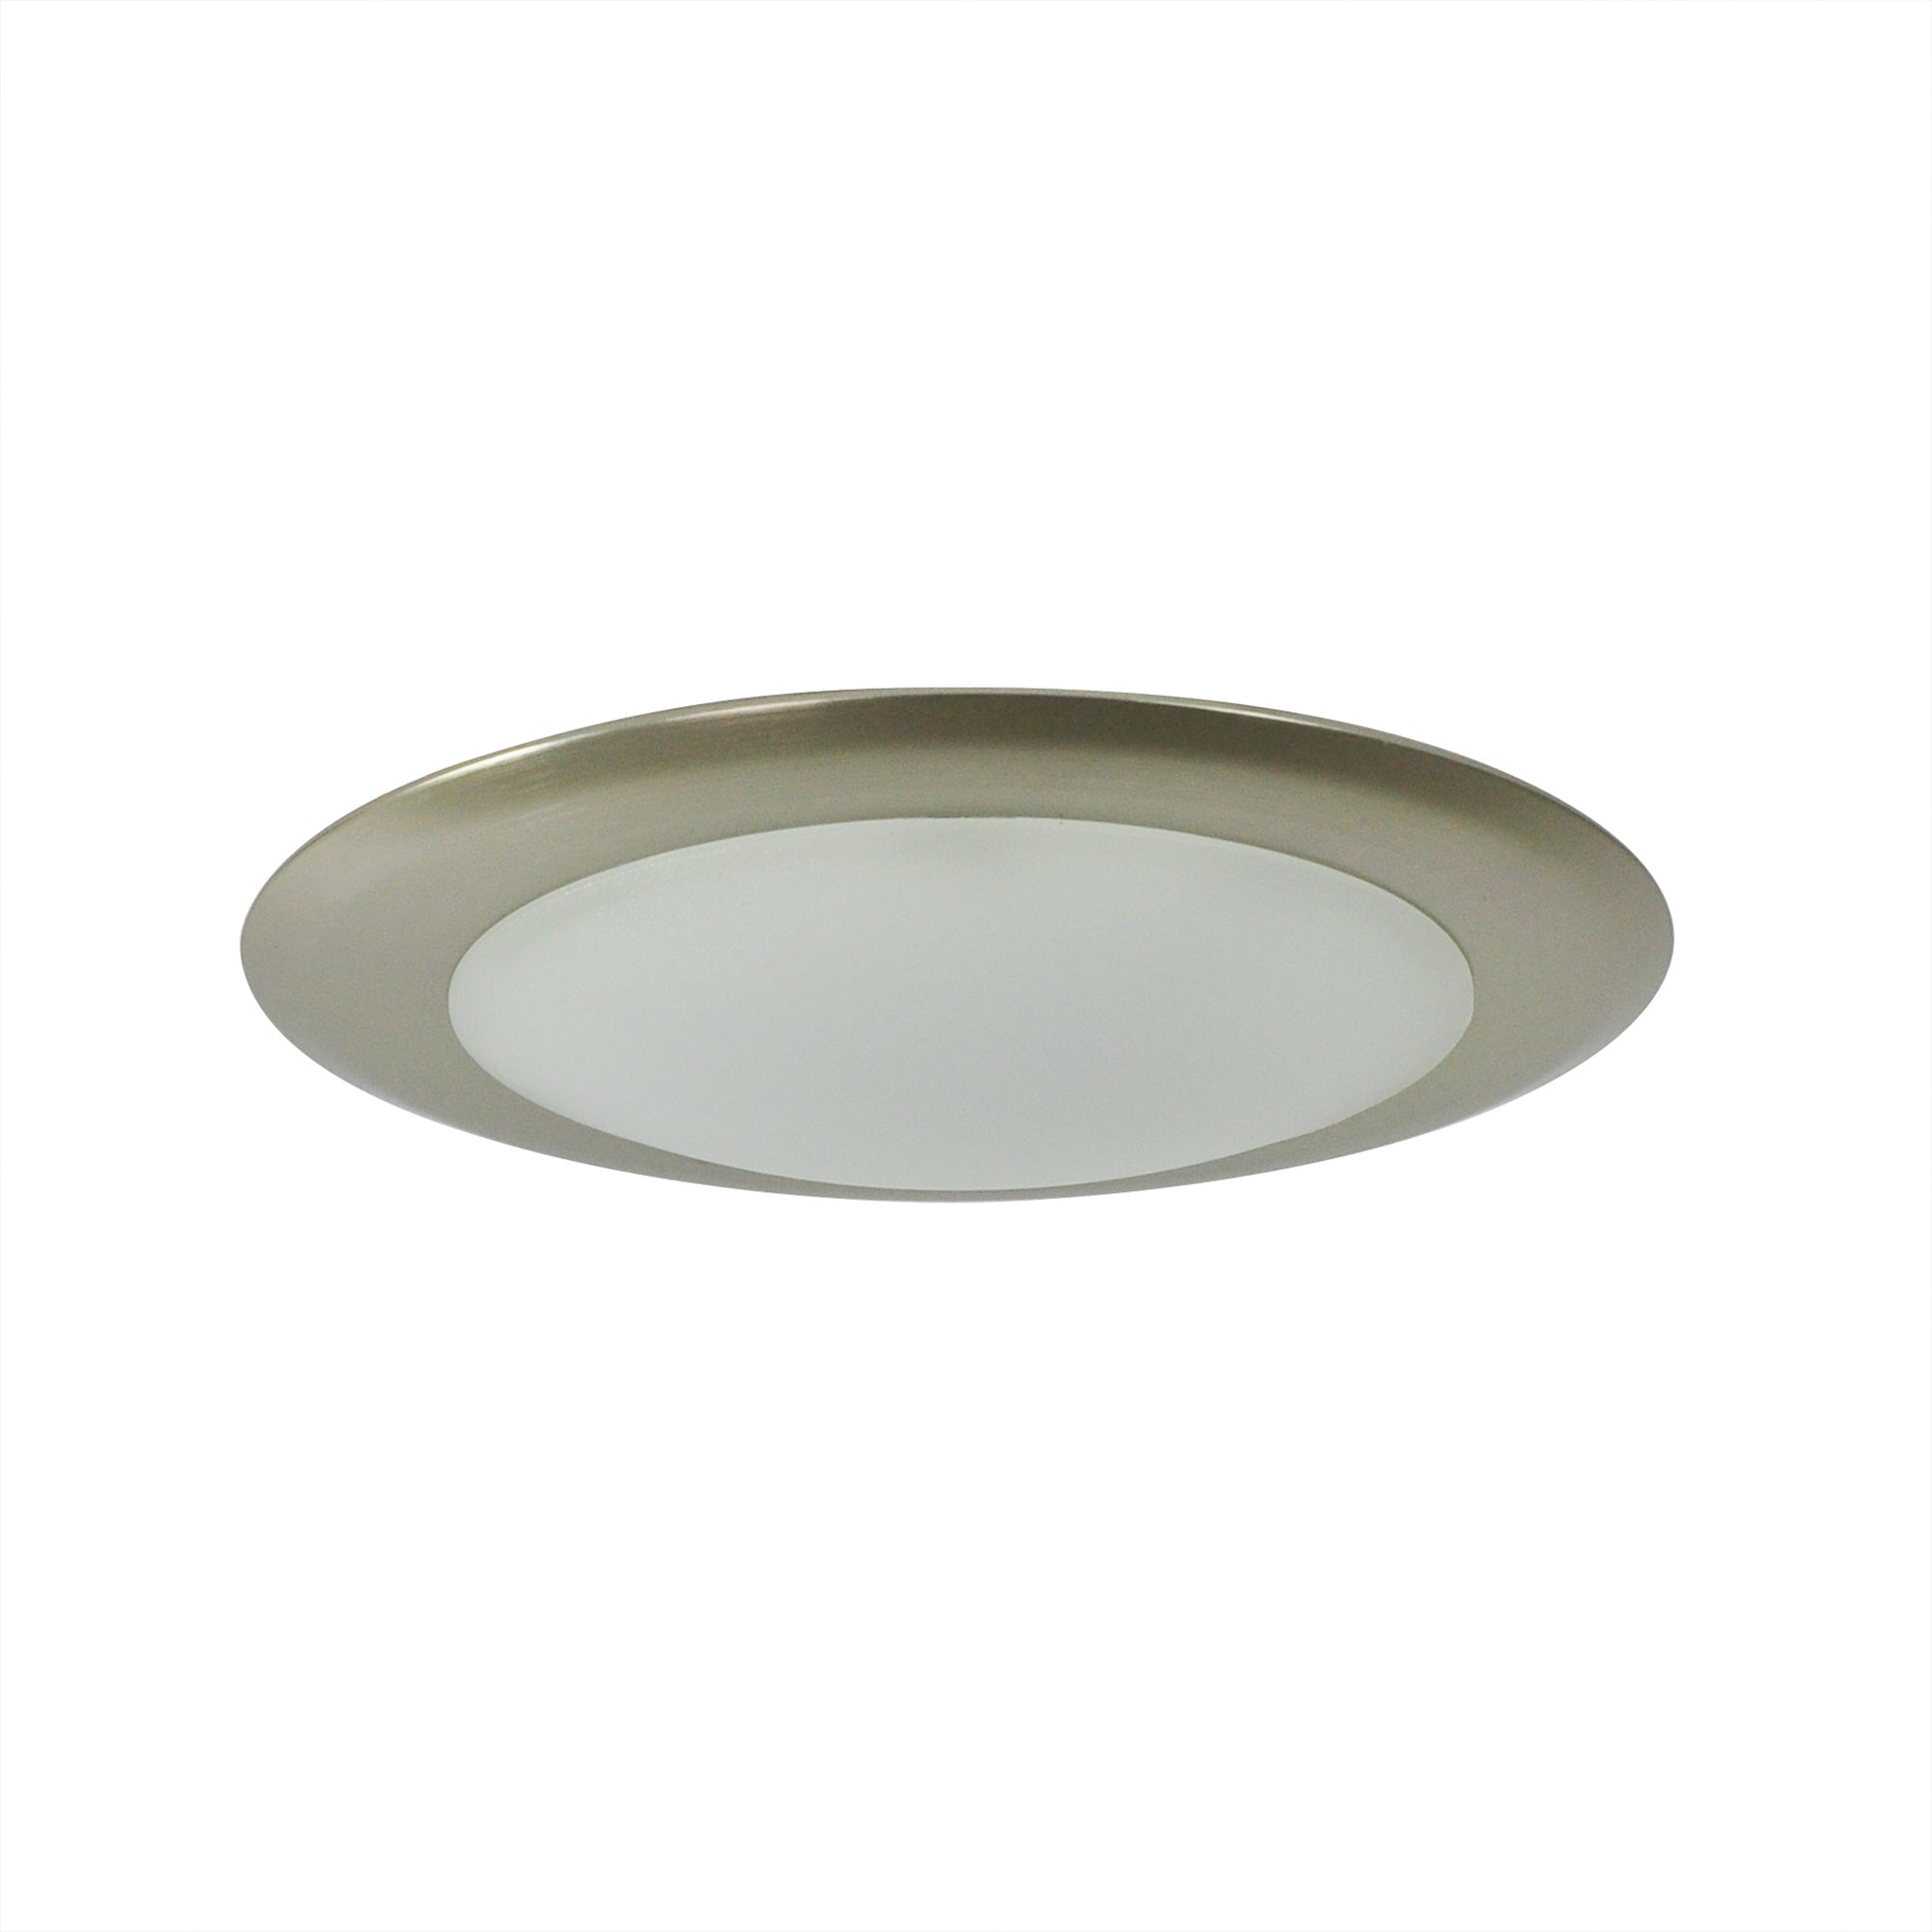 Nora Lighting NLOPAC-R6509T2427NM - Surface - 6 Inch AC Opal LED Surface Mount, 1150lm / 16.5W, 2700K, Natural Metal finish